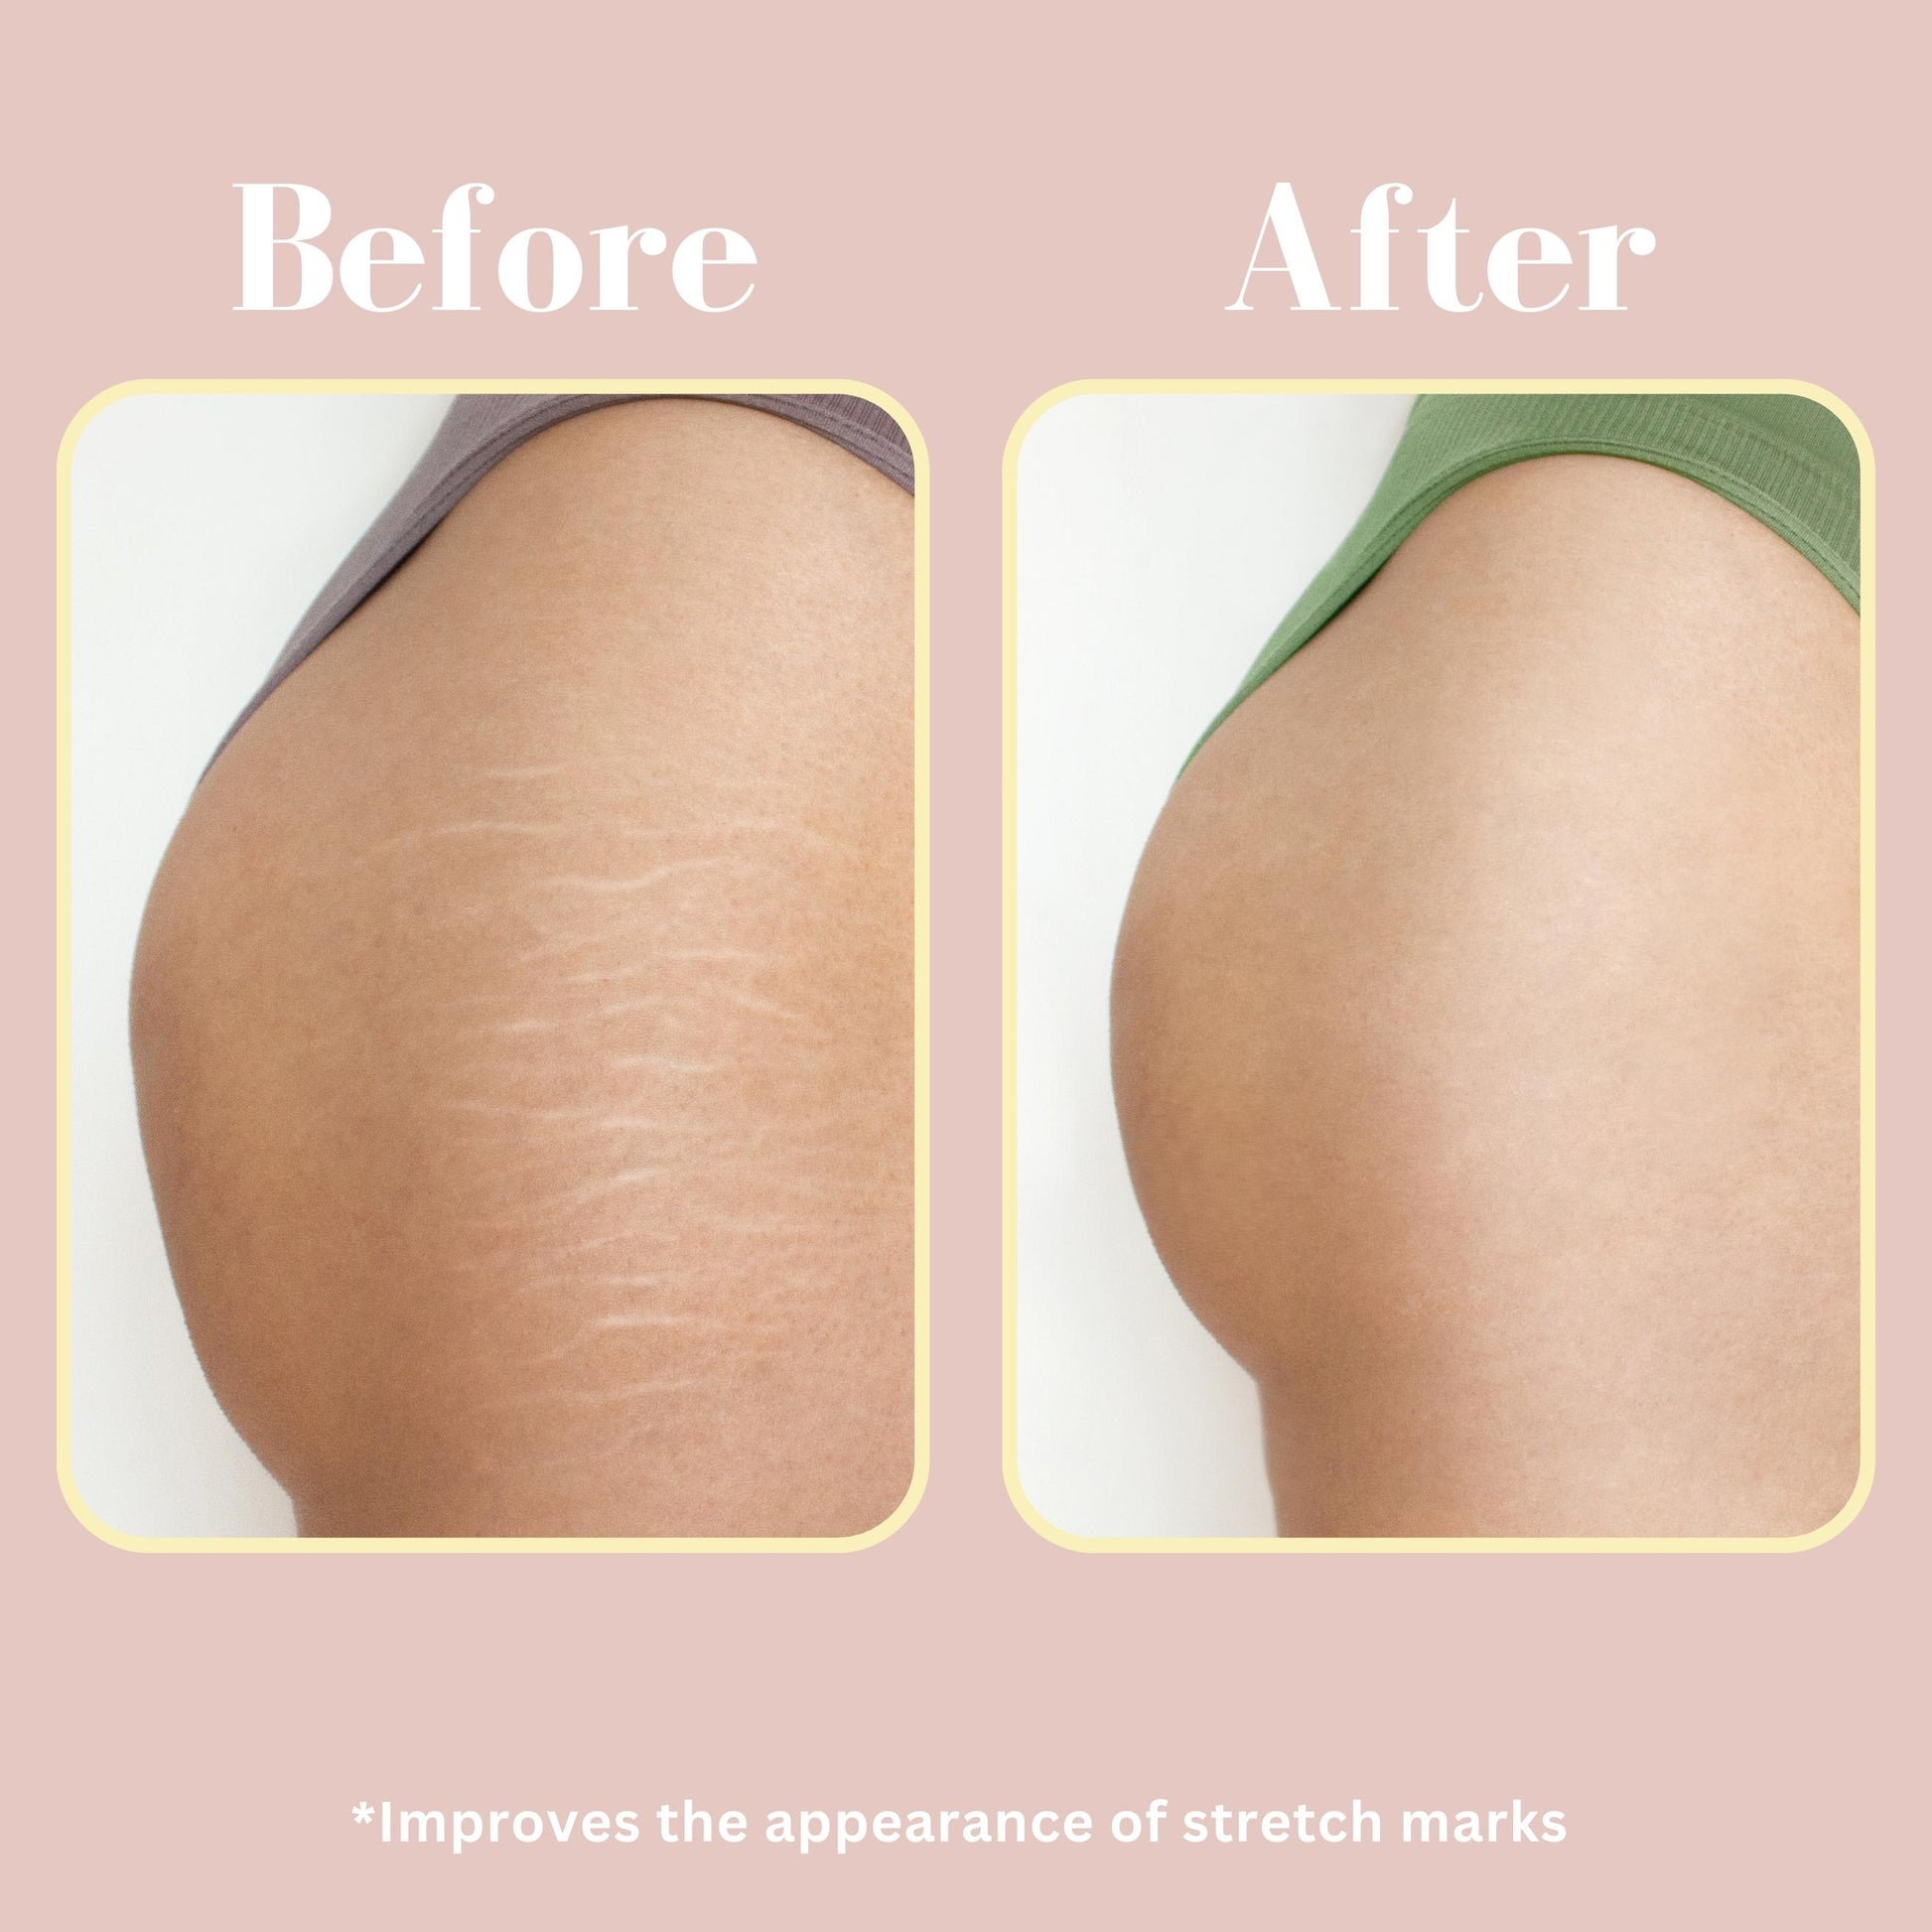 oil for stretch marks before and after